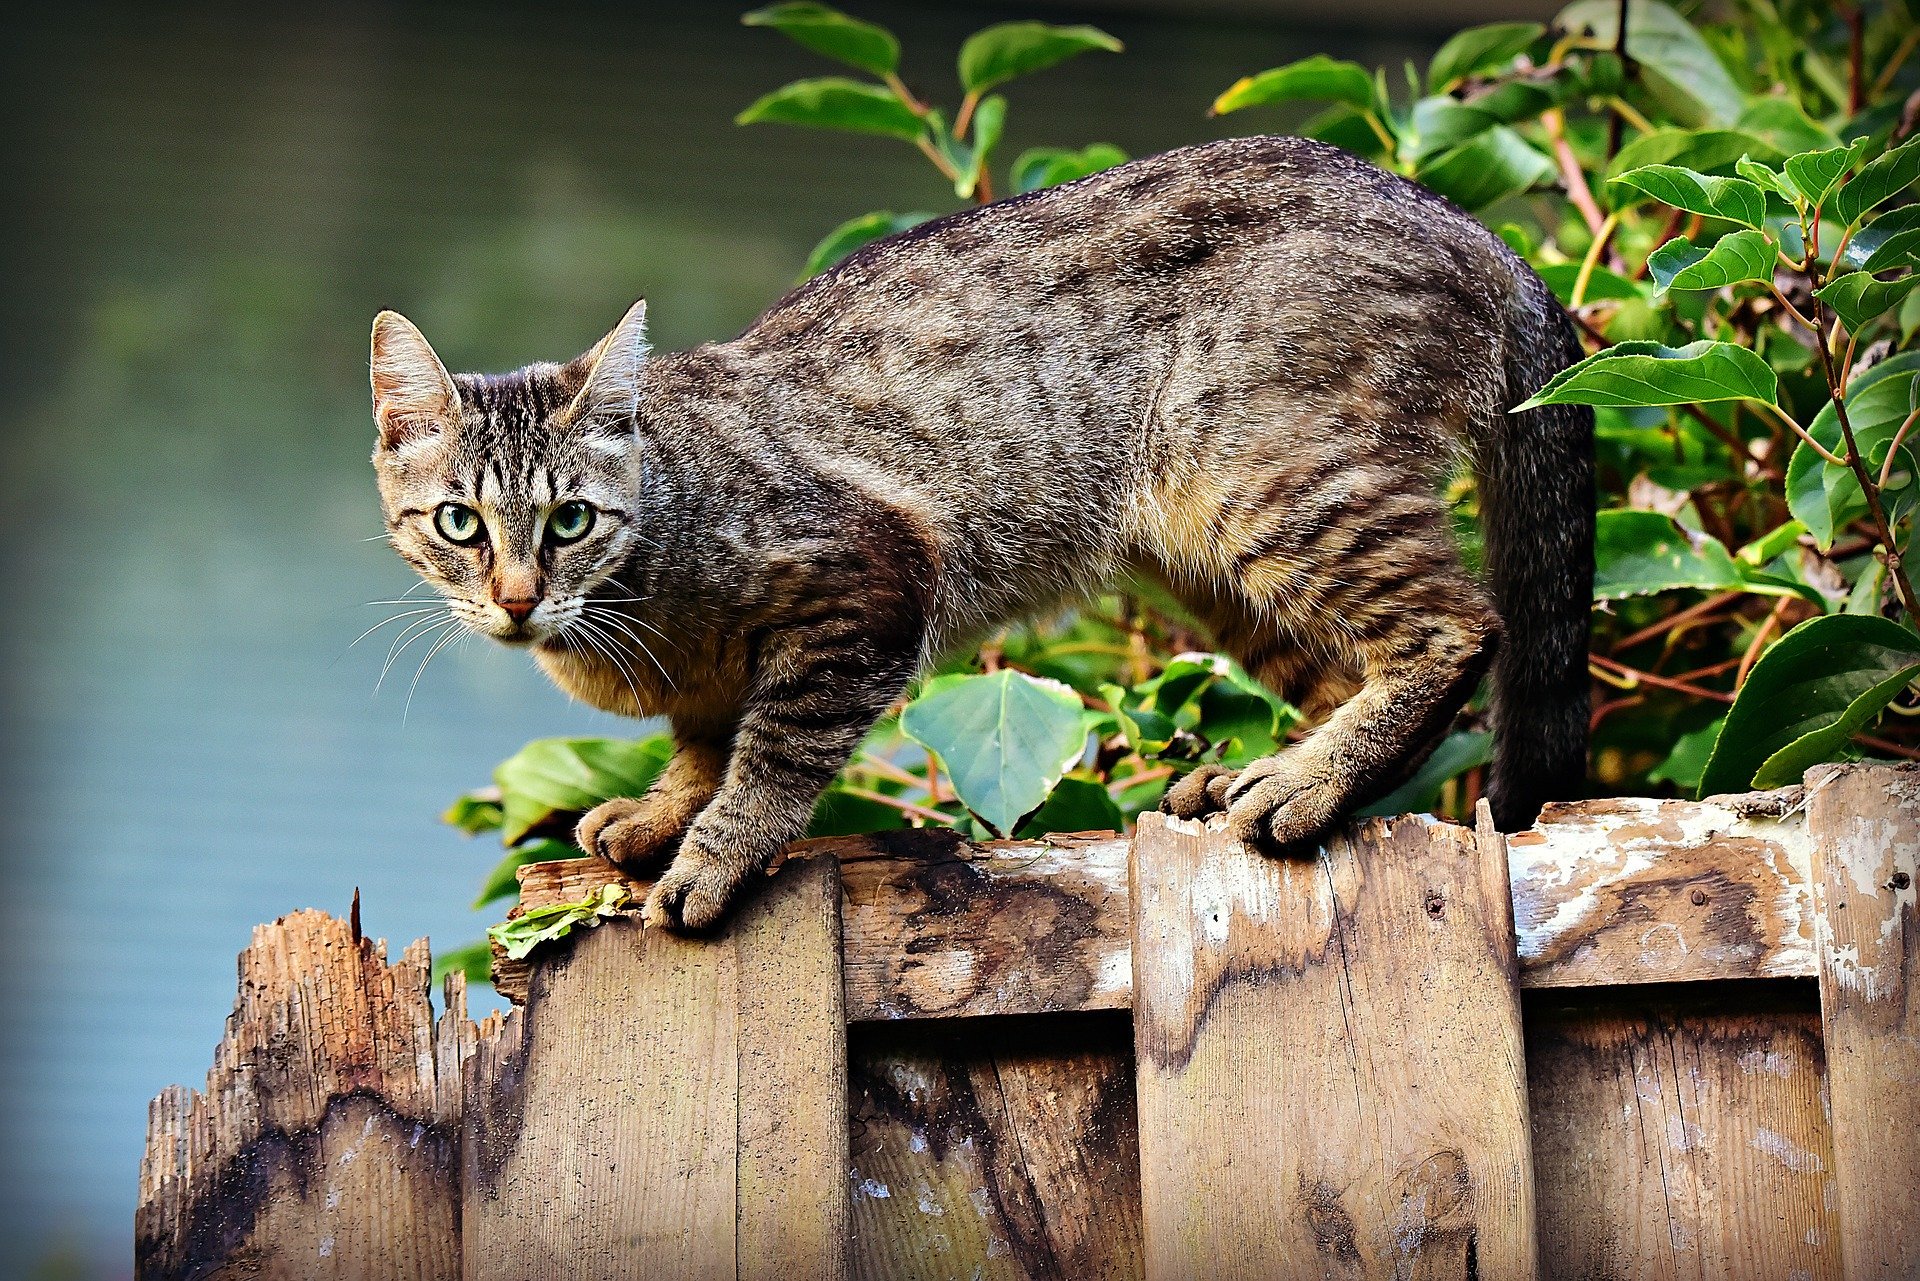 Cat crouching on a wooden fence staring at the camera | Photo: Pixabay/Mabel Amber